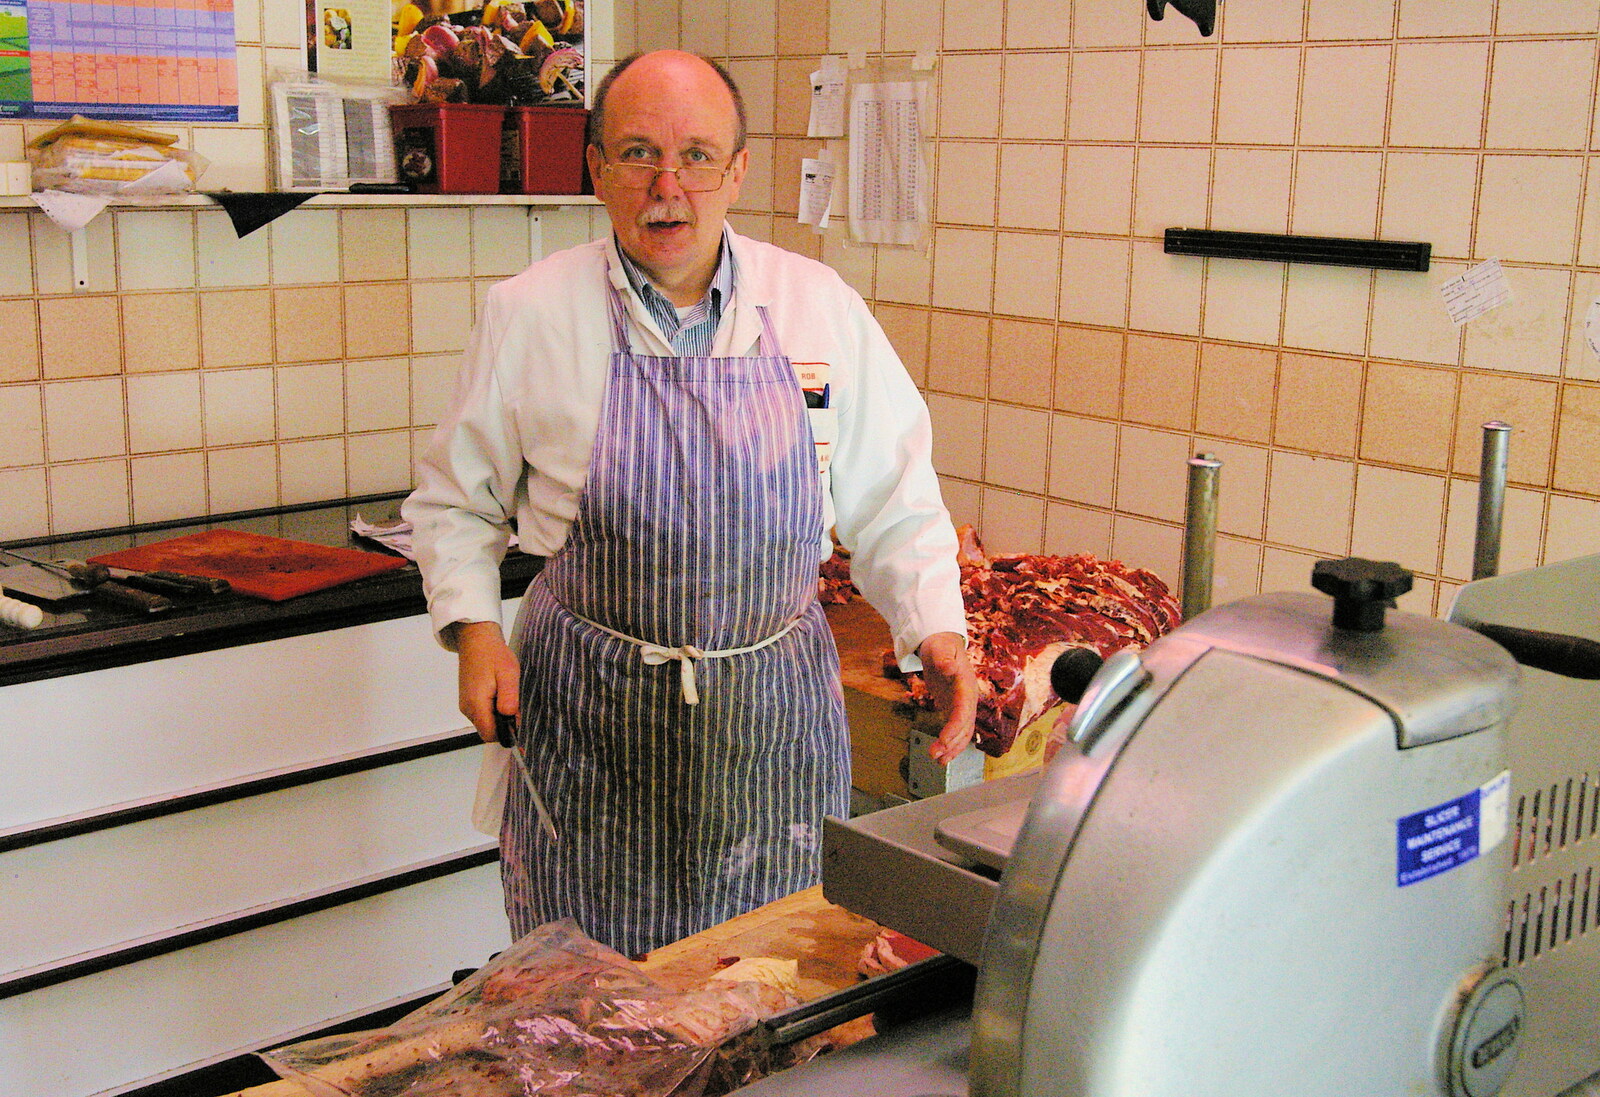 Rob, Jim's colleague, who now runs the butcher's from A Trip Around Macclesfield and Sandbach, Cheshire - 10th September 2005